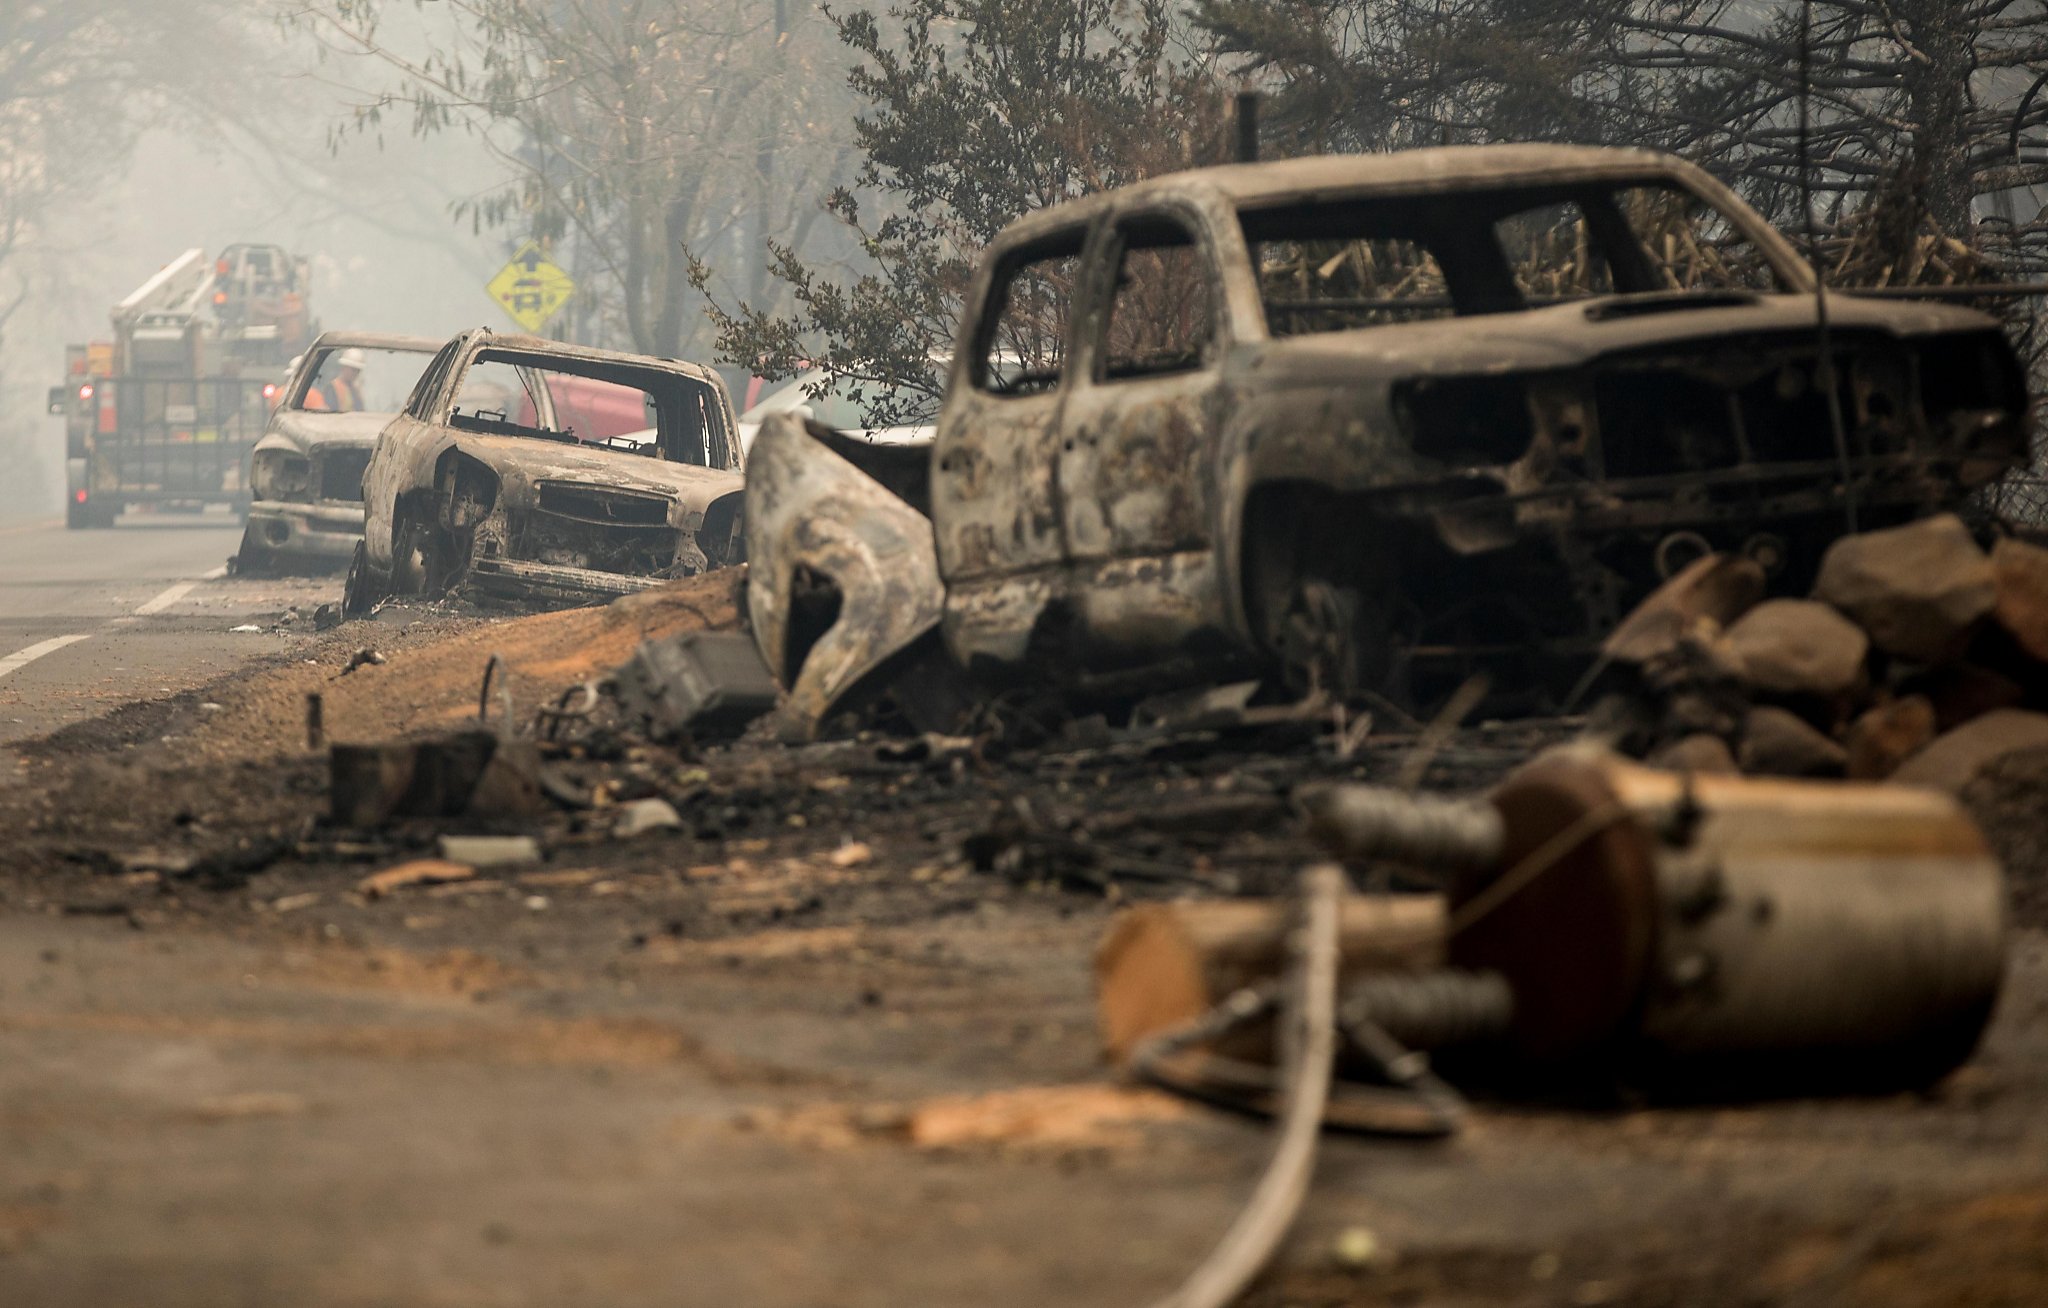 Camp Fire: Death toll grows to 71, missing list grows to 1,011 - SFChronicle.com2048 x 1308